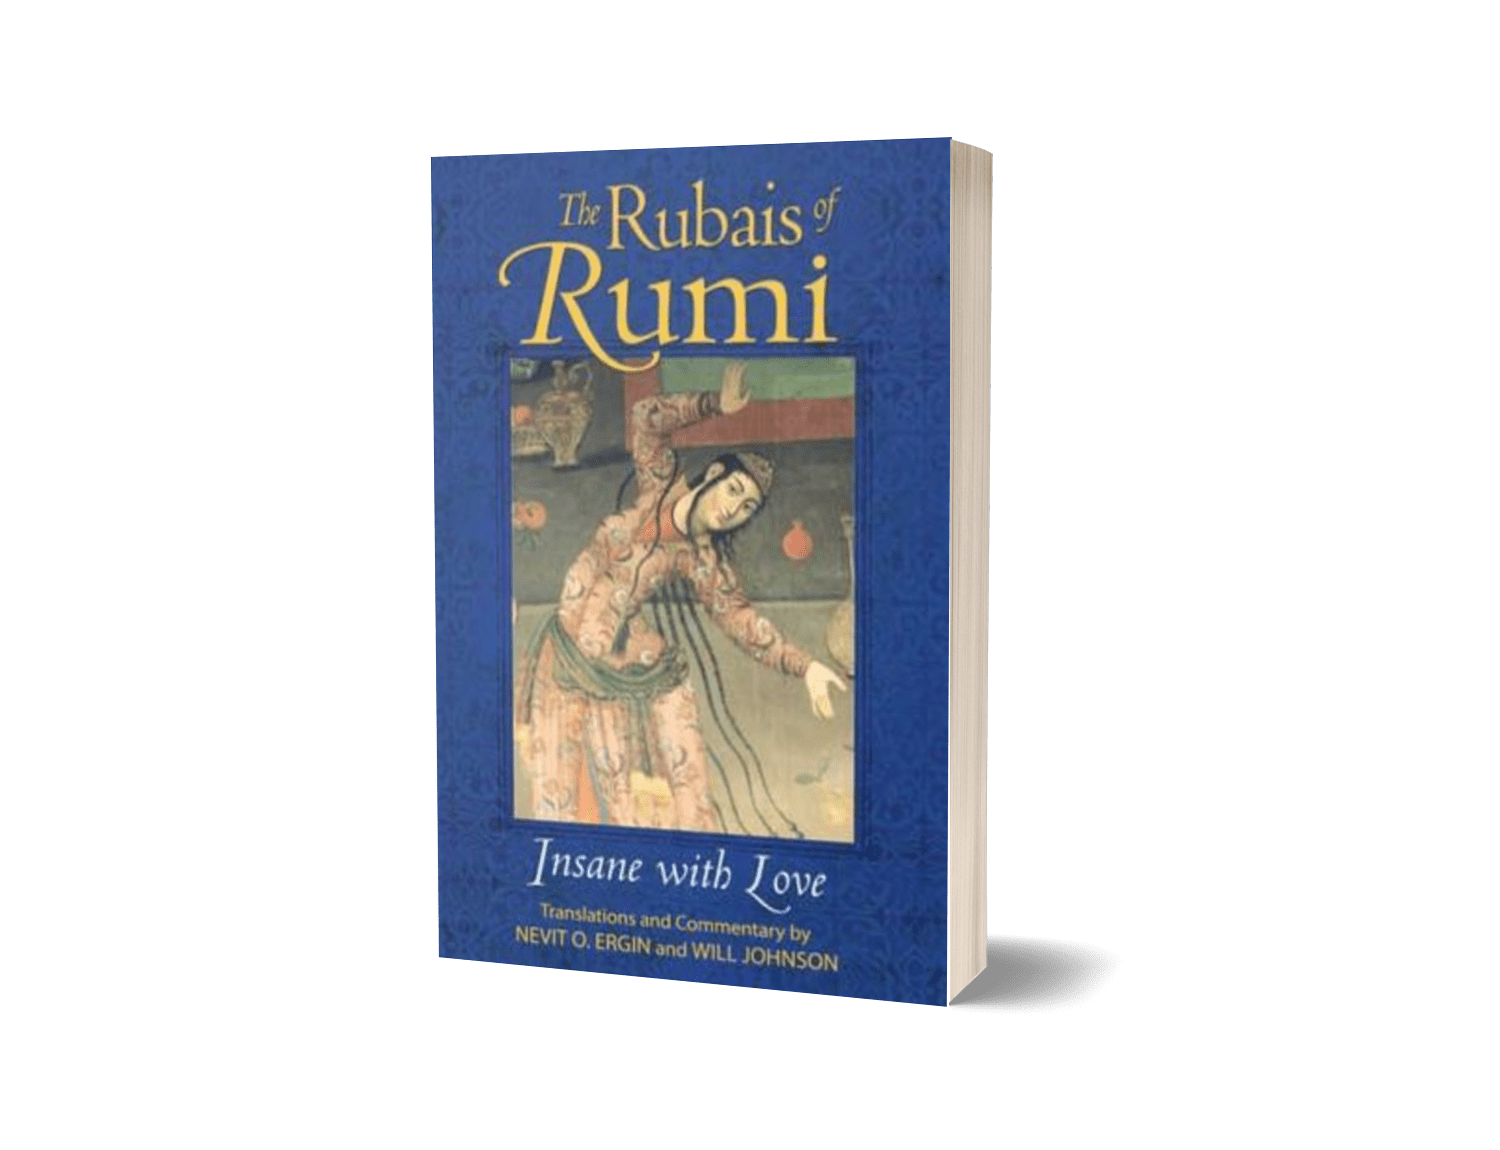 The Rubais of Rumi by Ergin and Jhonson